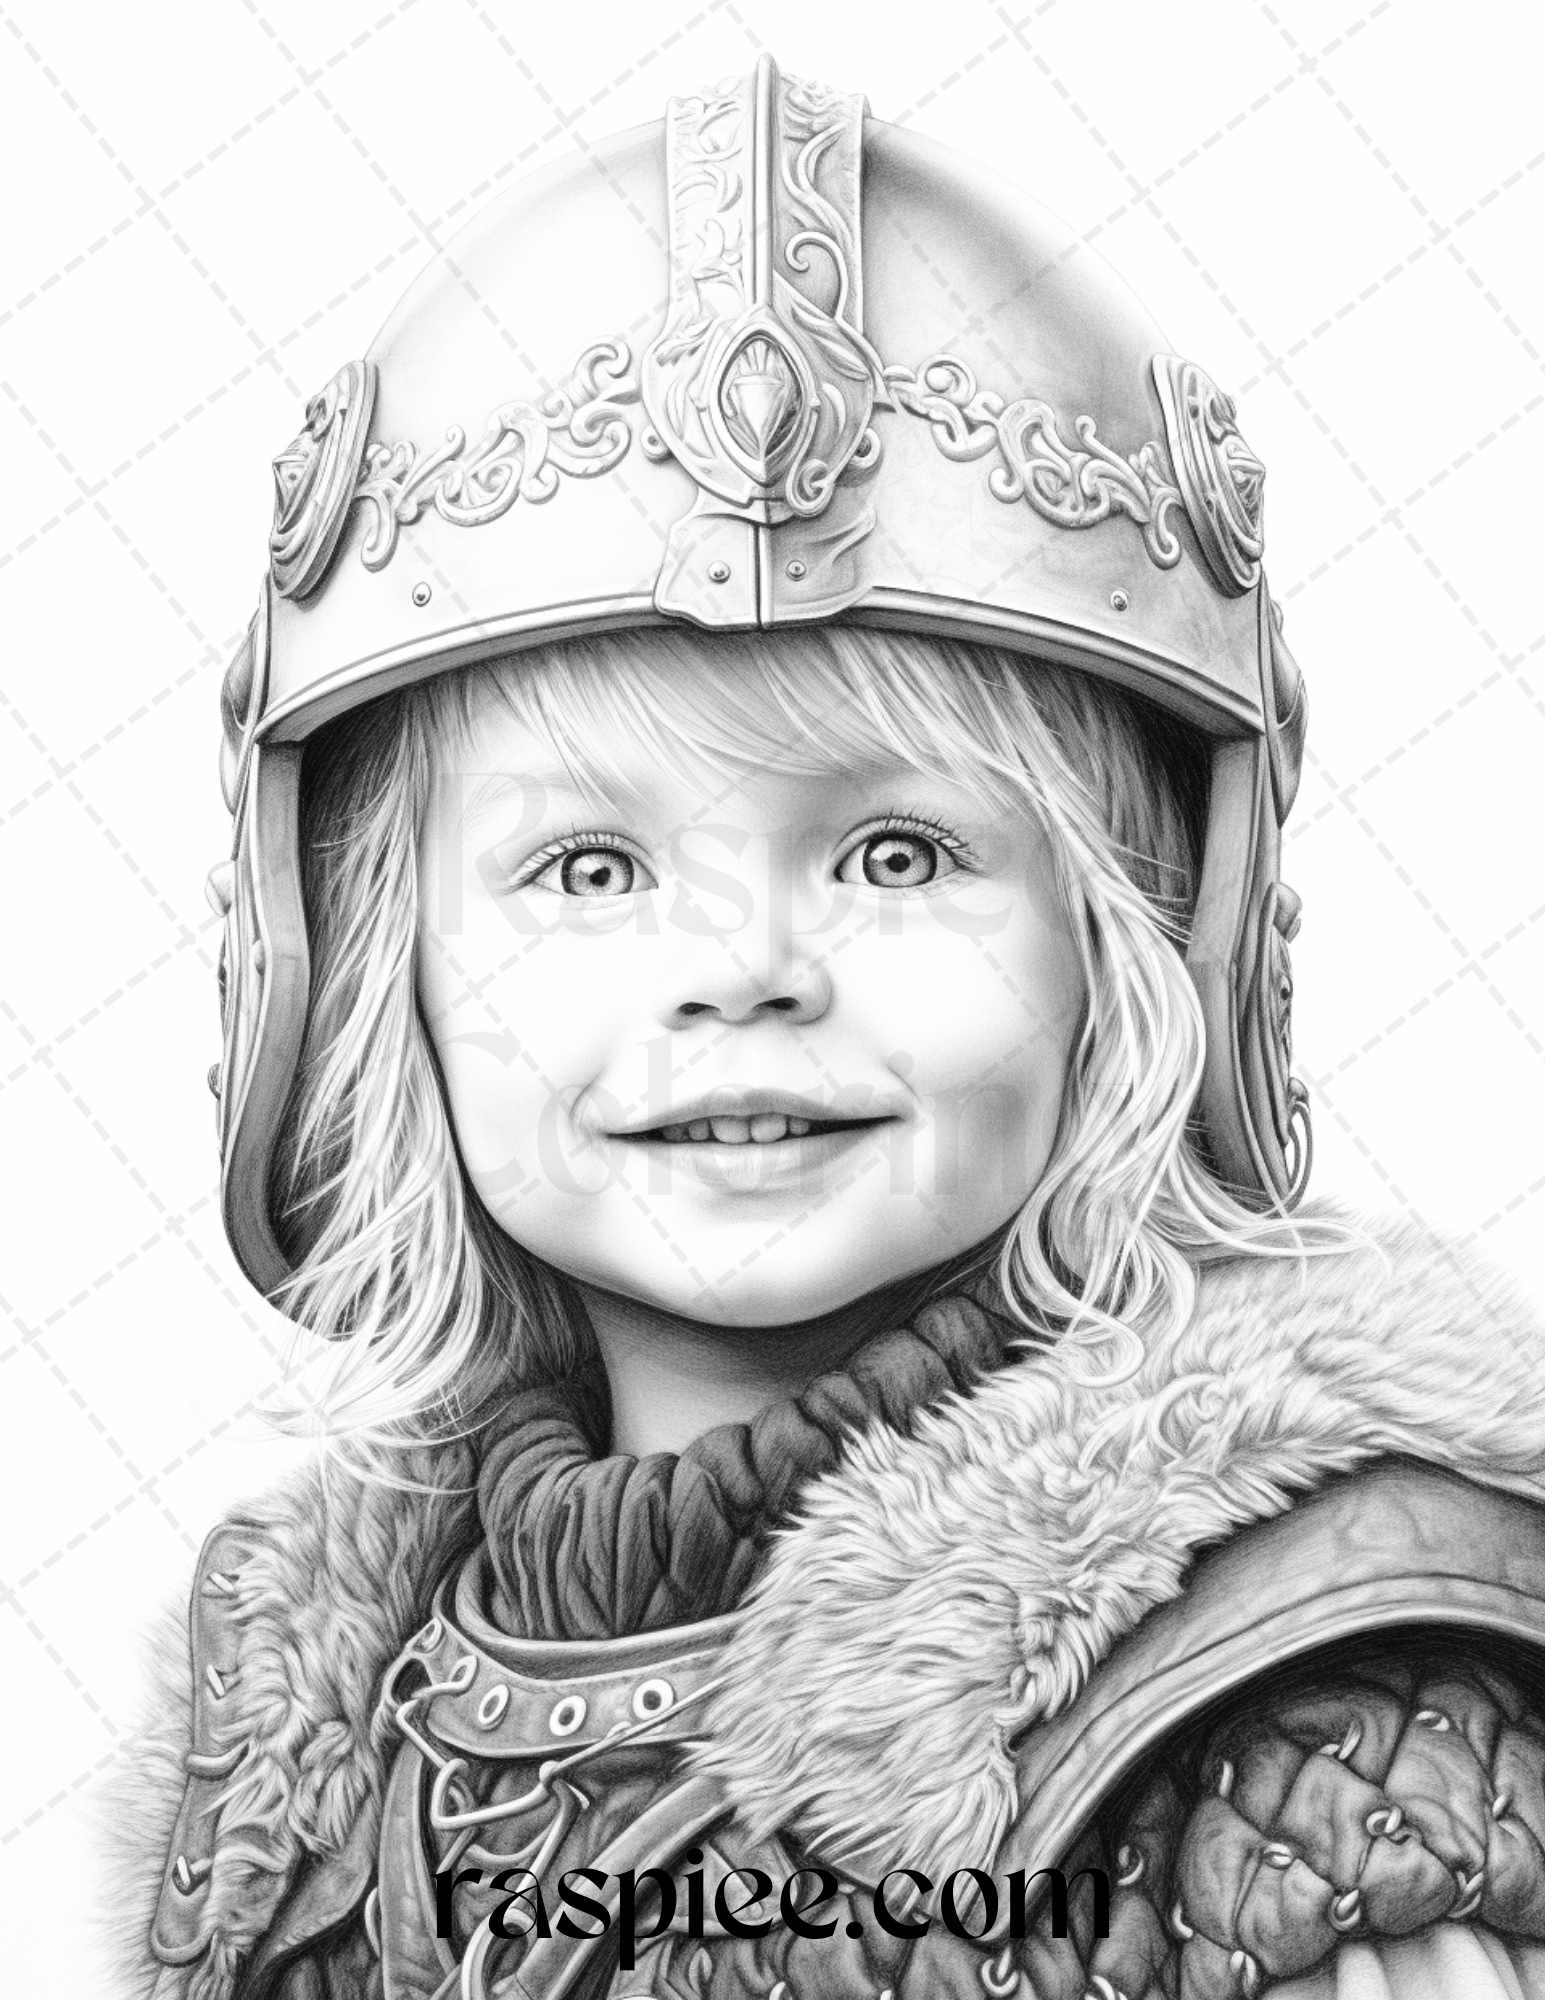 58 Little Viking Girls Boys Portrait Grayscale Coloring Pages Printable, PDF File Instant Download - Raspiee Coloring